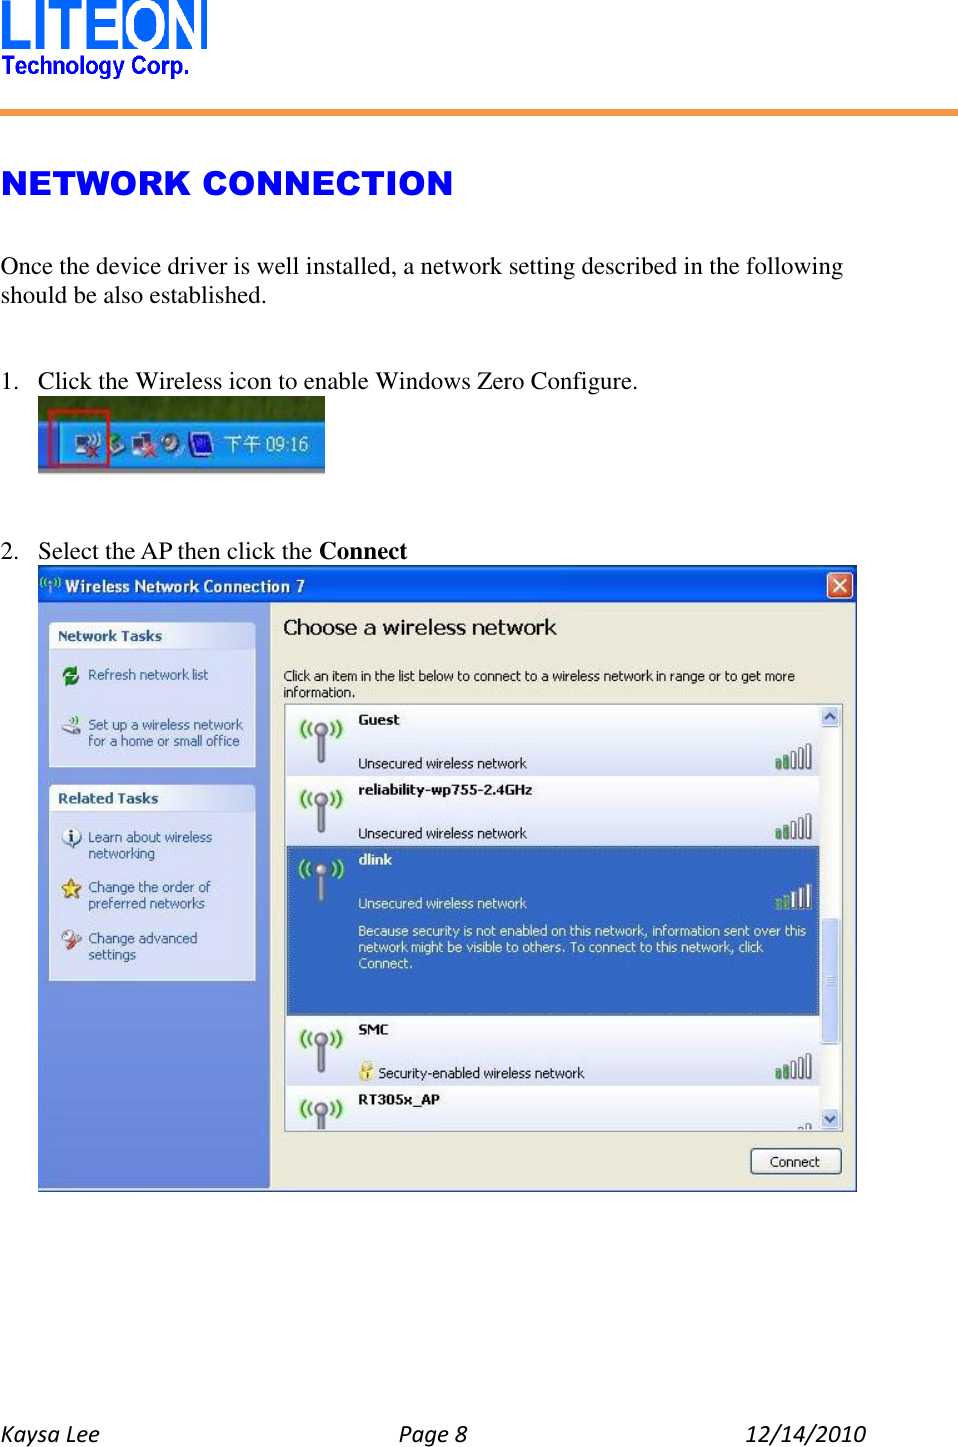   Kaysa Lee  Page 8  12/14/2010    NETWORK CONNECTION  Once the device driver is well installed, a network setting described in the following should be also established.   1. Click the Wireless icon to enable Windows Zero Configure.    2. Select the AP then click the Connect  